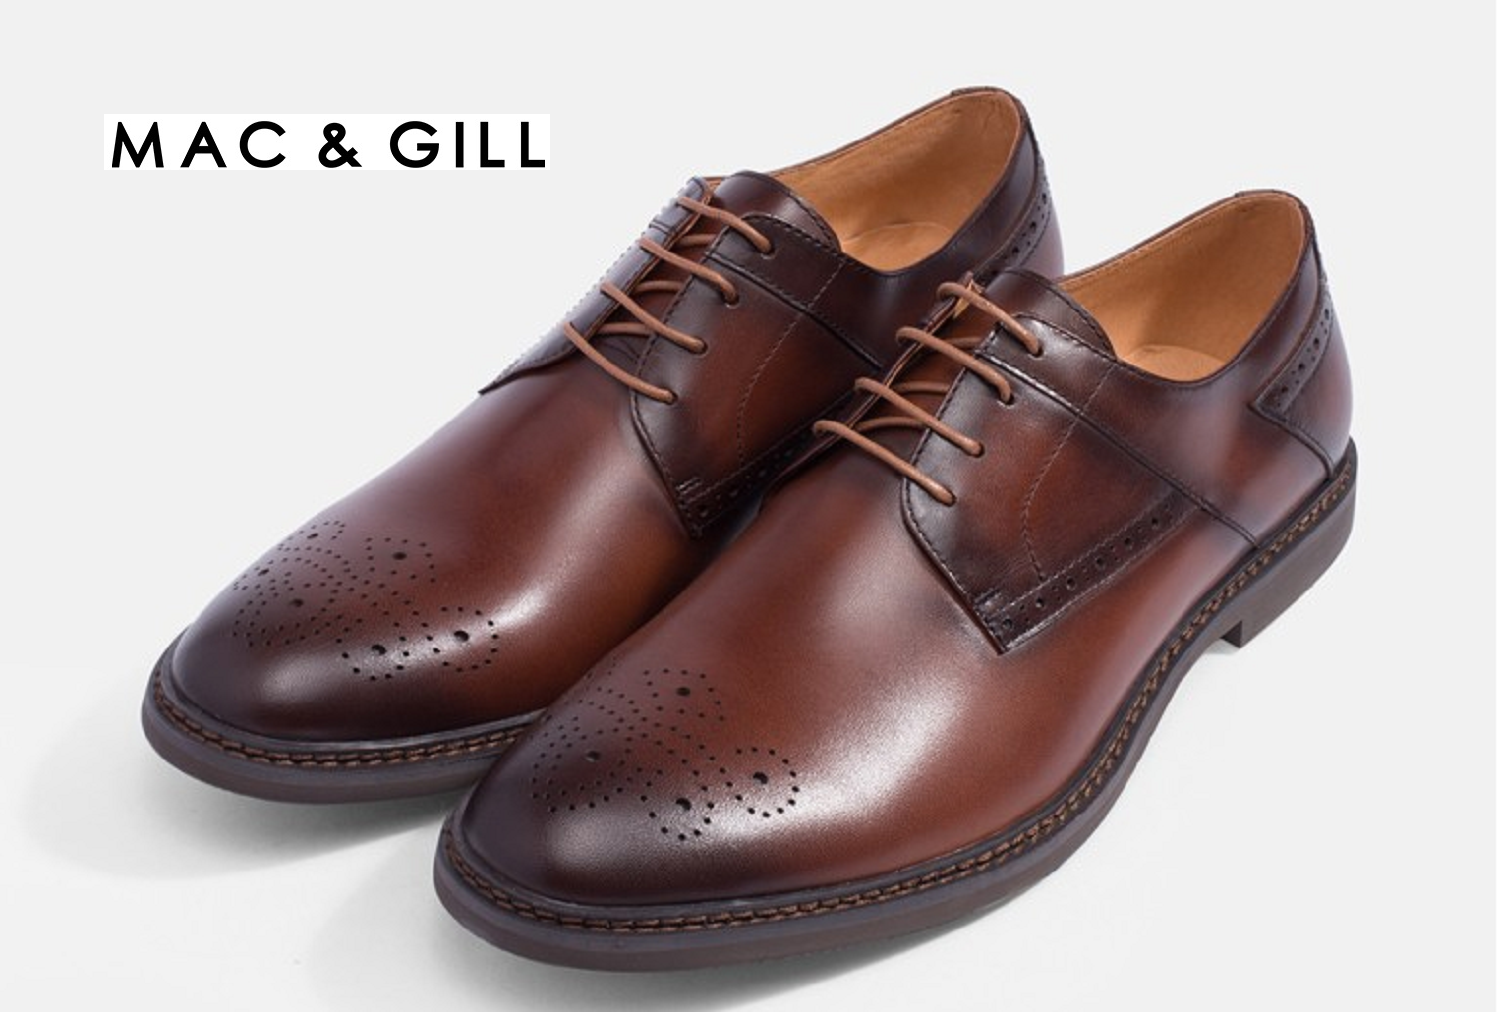 MAC&GILL MEDALLION TOE DERBY GENUINE LEATHER LACED UP SHOES PATINA